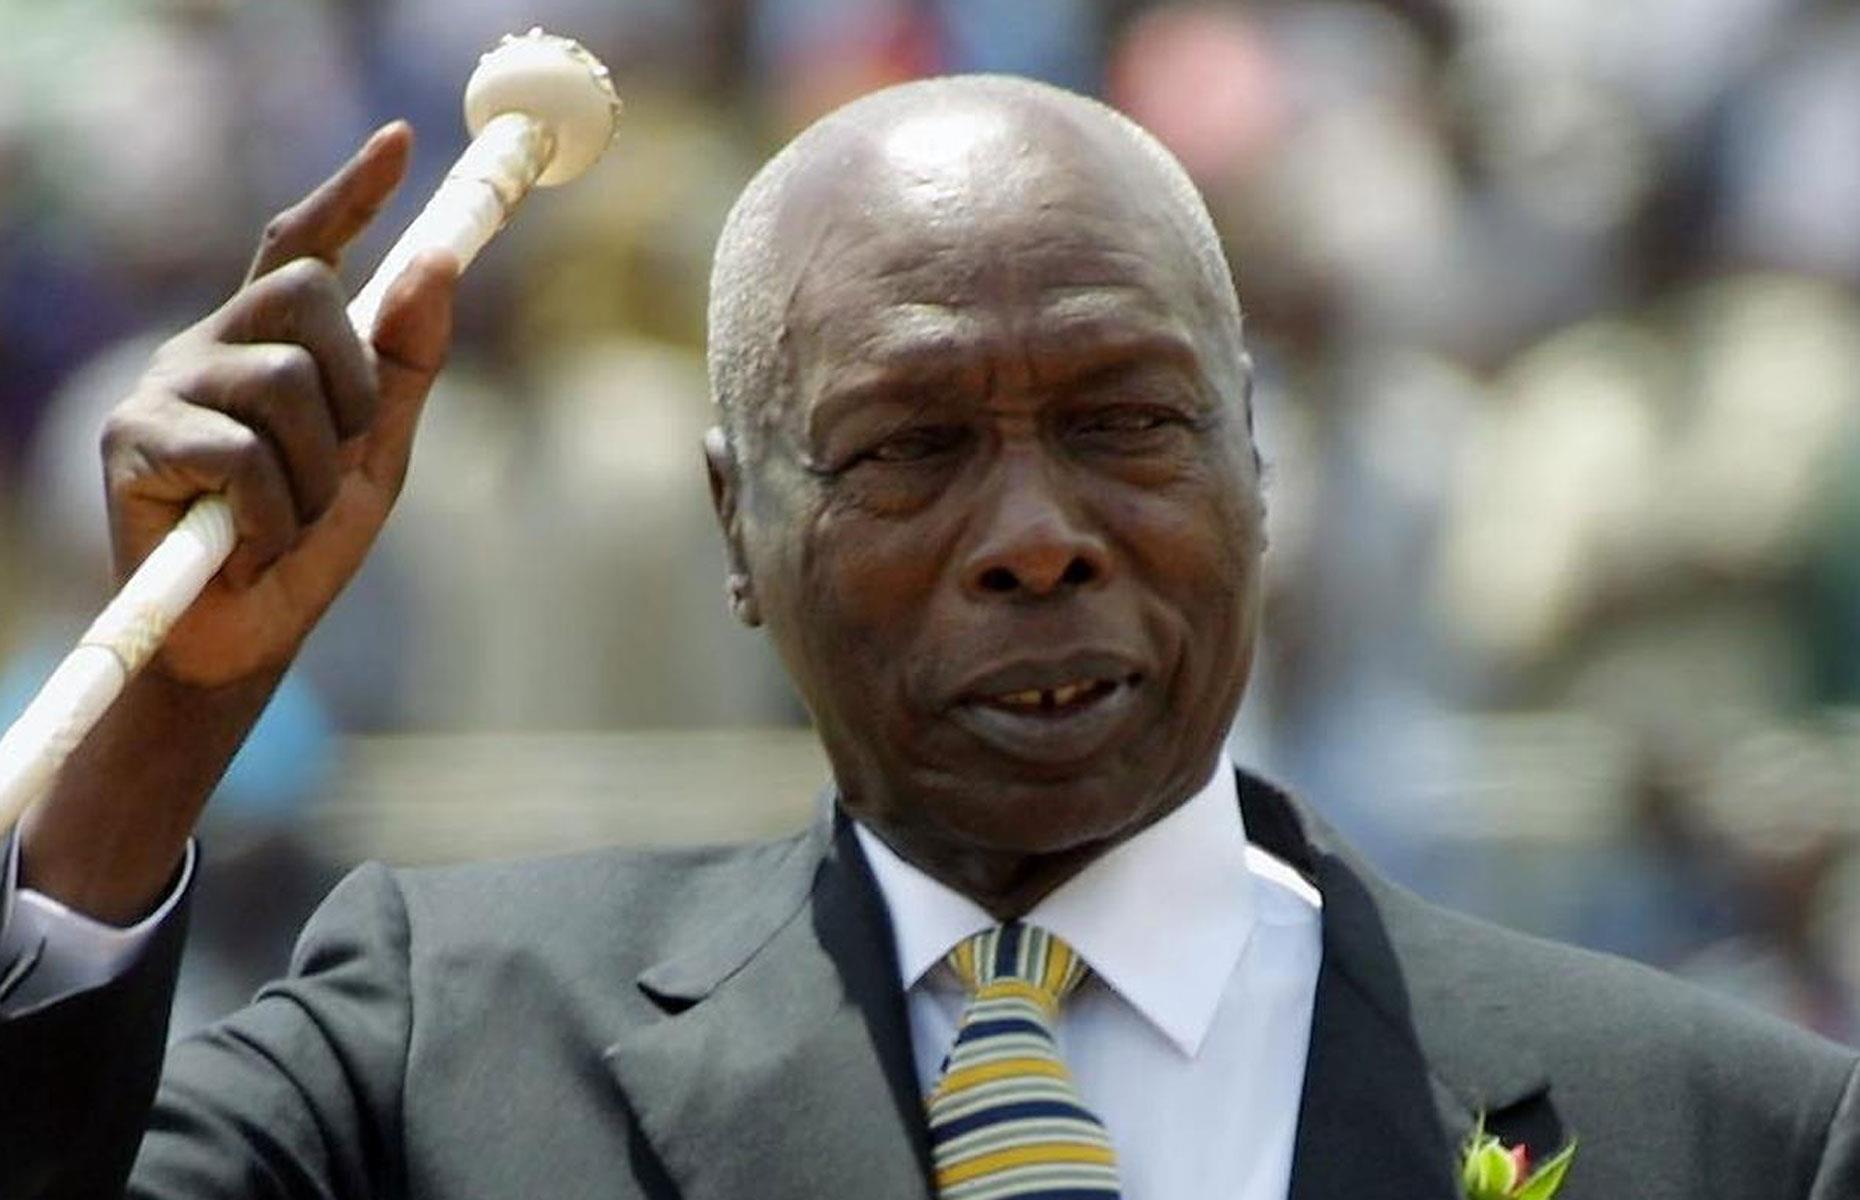 <p>Daniel Arap Moi was president of Kenya from 1978 to 2002. During his time in office, the late politician funnelled upwards of $1 billion into secret bank accounts and private estates around the world. According to <em>Forbes</em>, Moi's assets included ample stakes in several oil companies, a 247,000-acre farm in Australia and shares in banks and shipping firms. Around the time of his death earlier this year, the retired politician was said to be worth as much as $3 billion.</p>